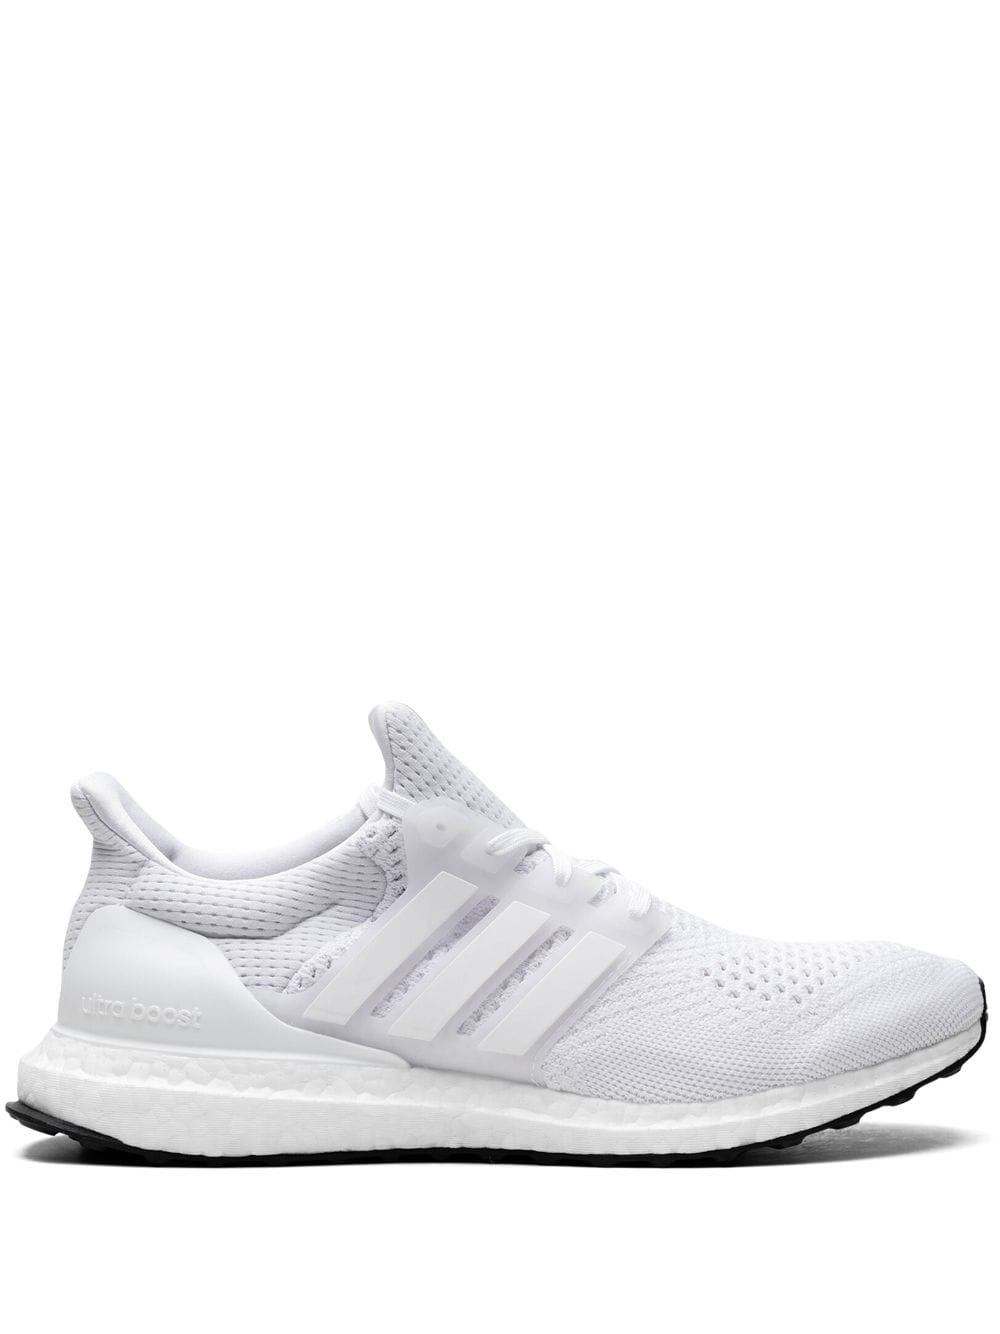 adidas Ultraboost low-top sneakers - White von adidas